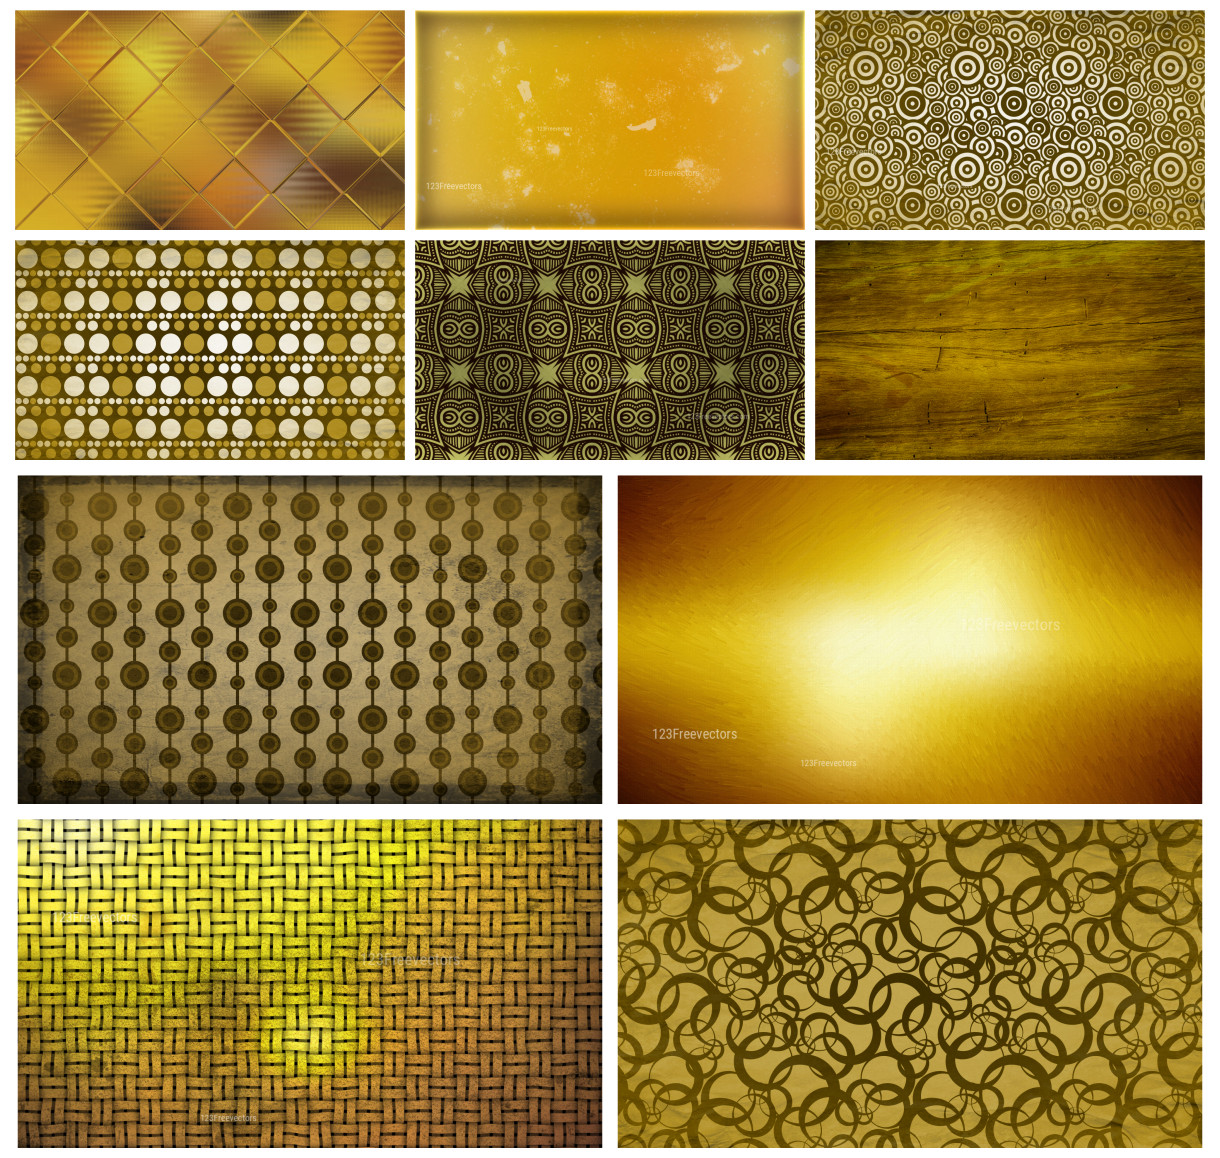 10 Inspiring Brown and Gold Designs for Your Creative Projects